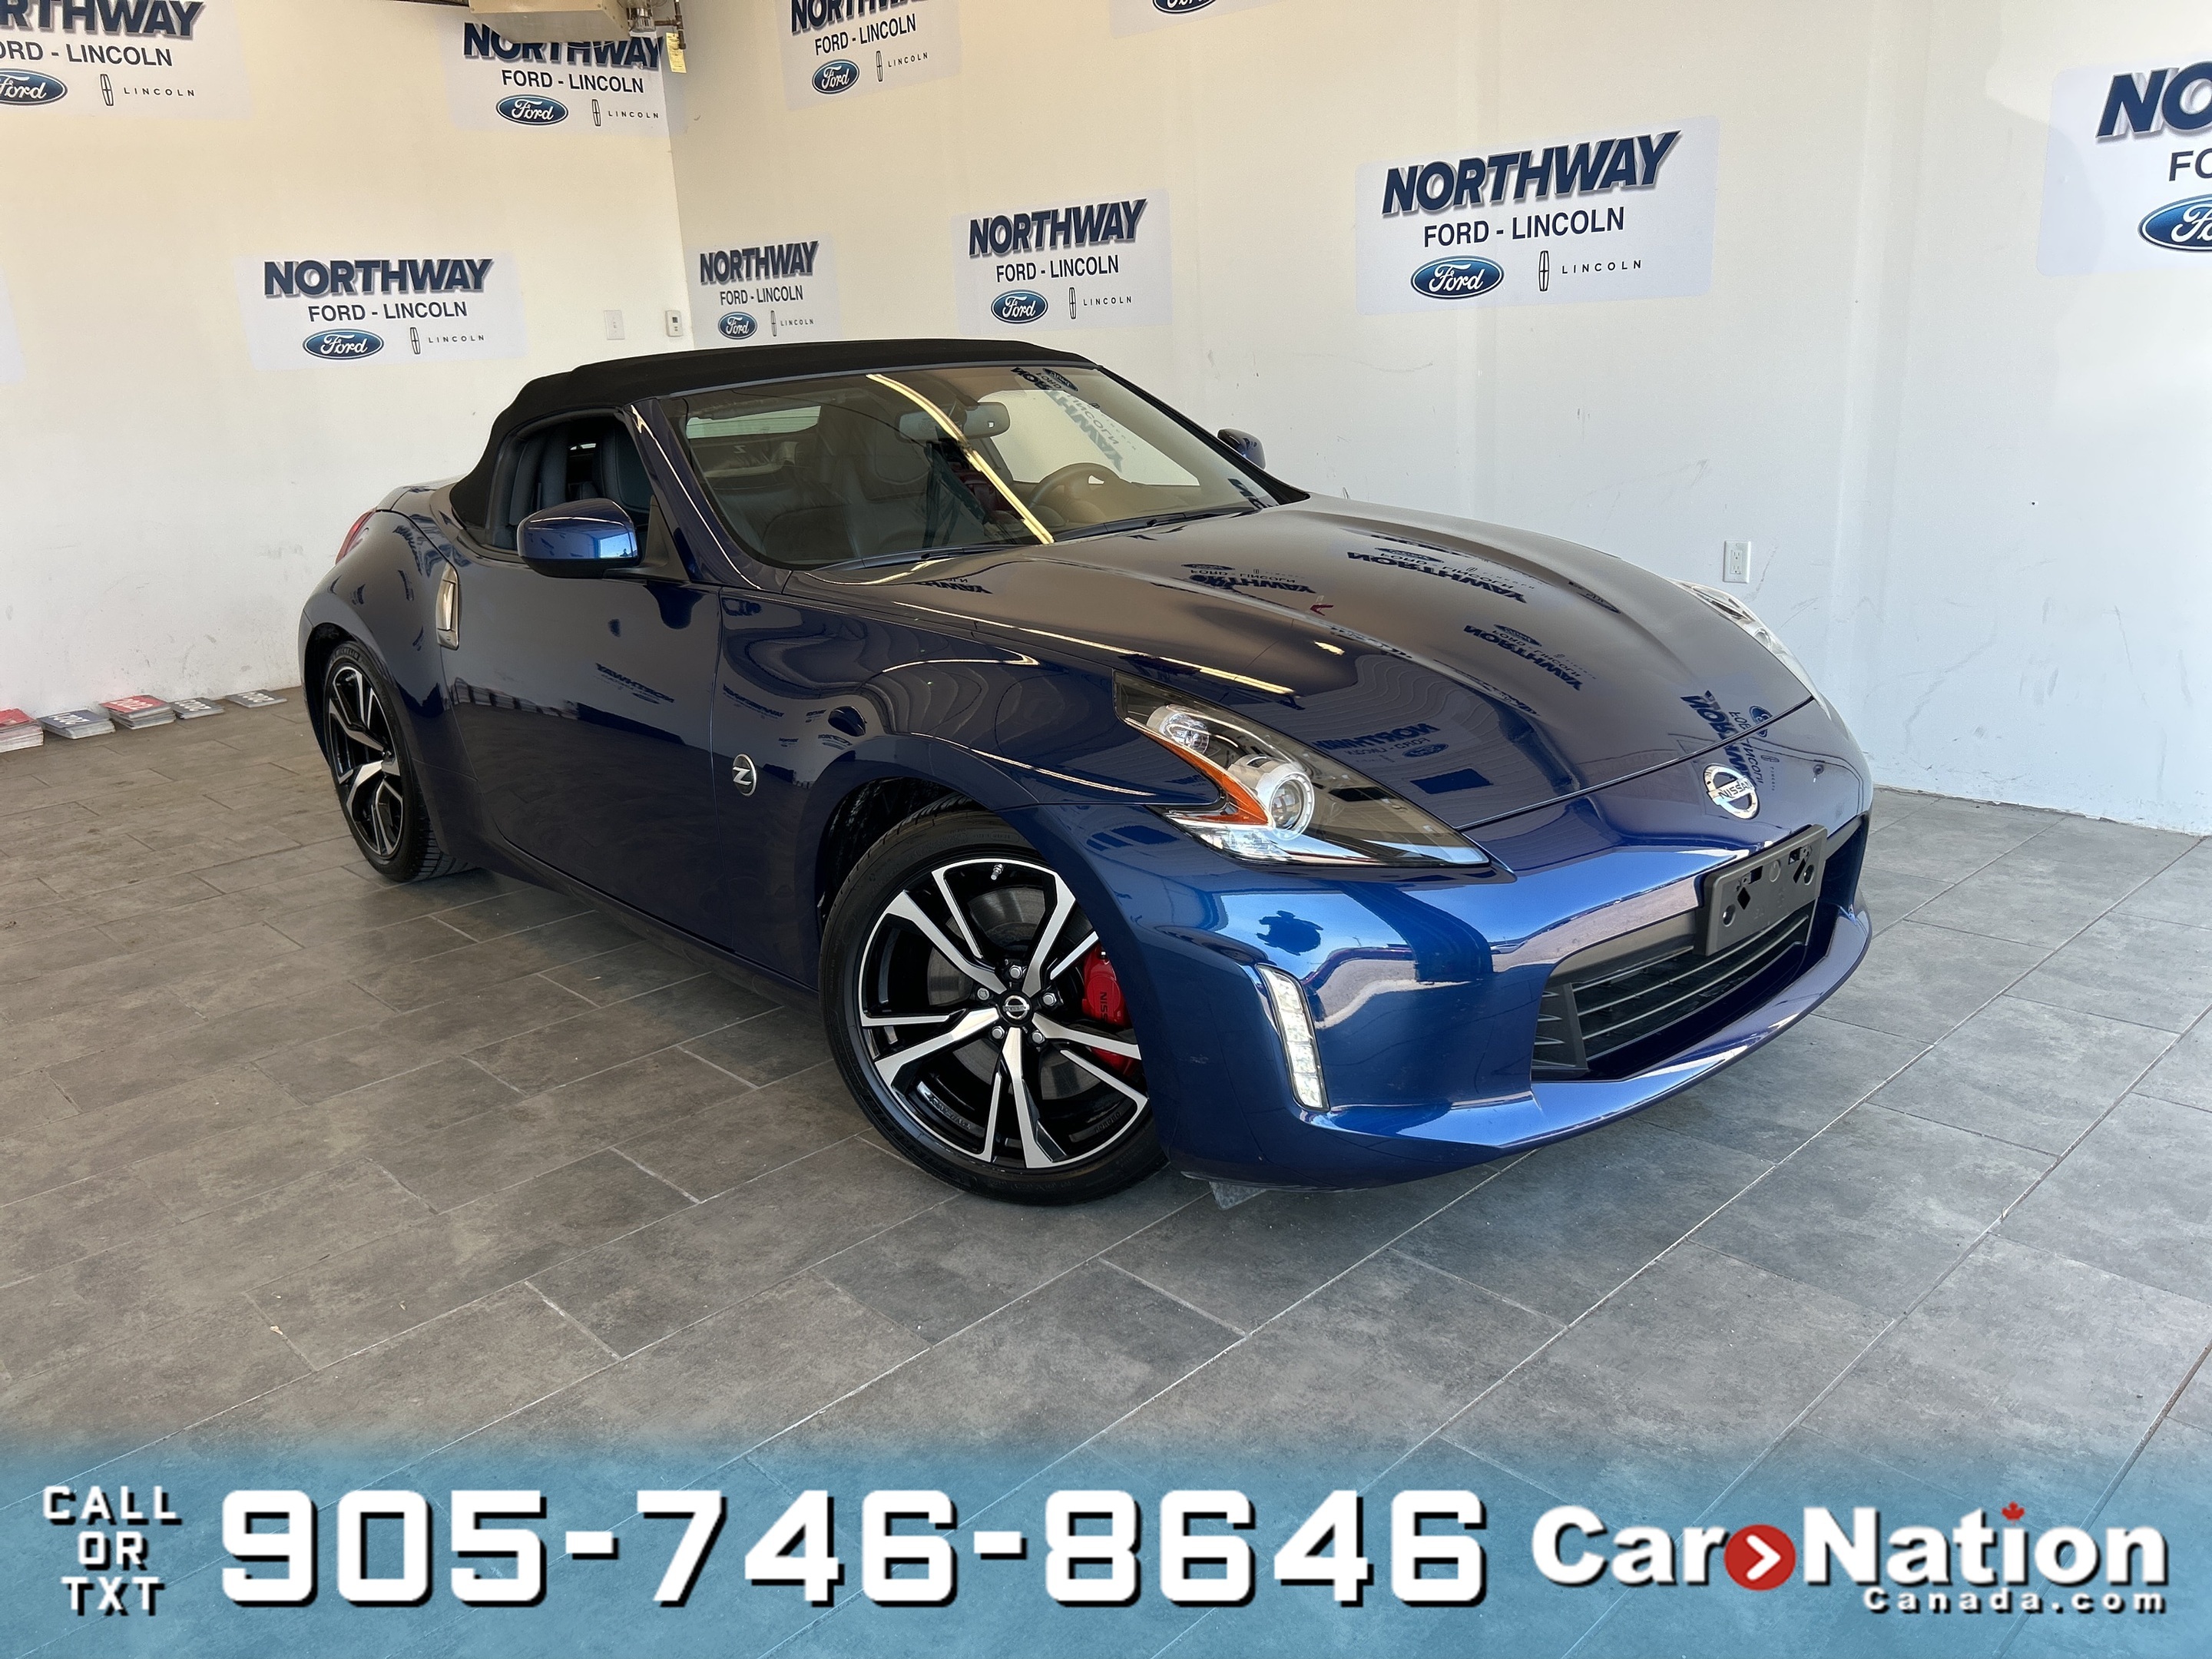 2019 Nissan 370Z ROADSTER TOURING | CONVERTIBLE | LEATHER | 6 SPEED M/T|NAV